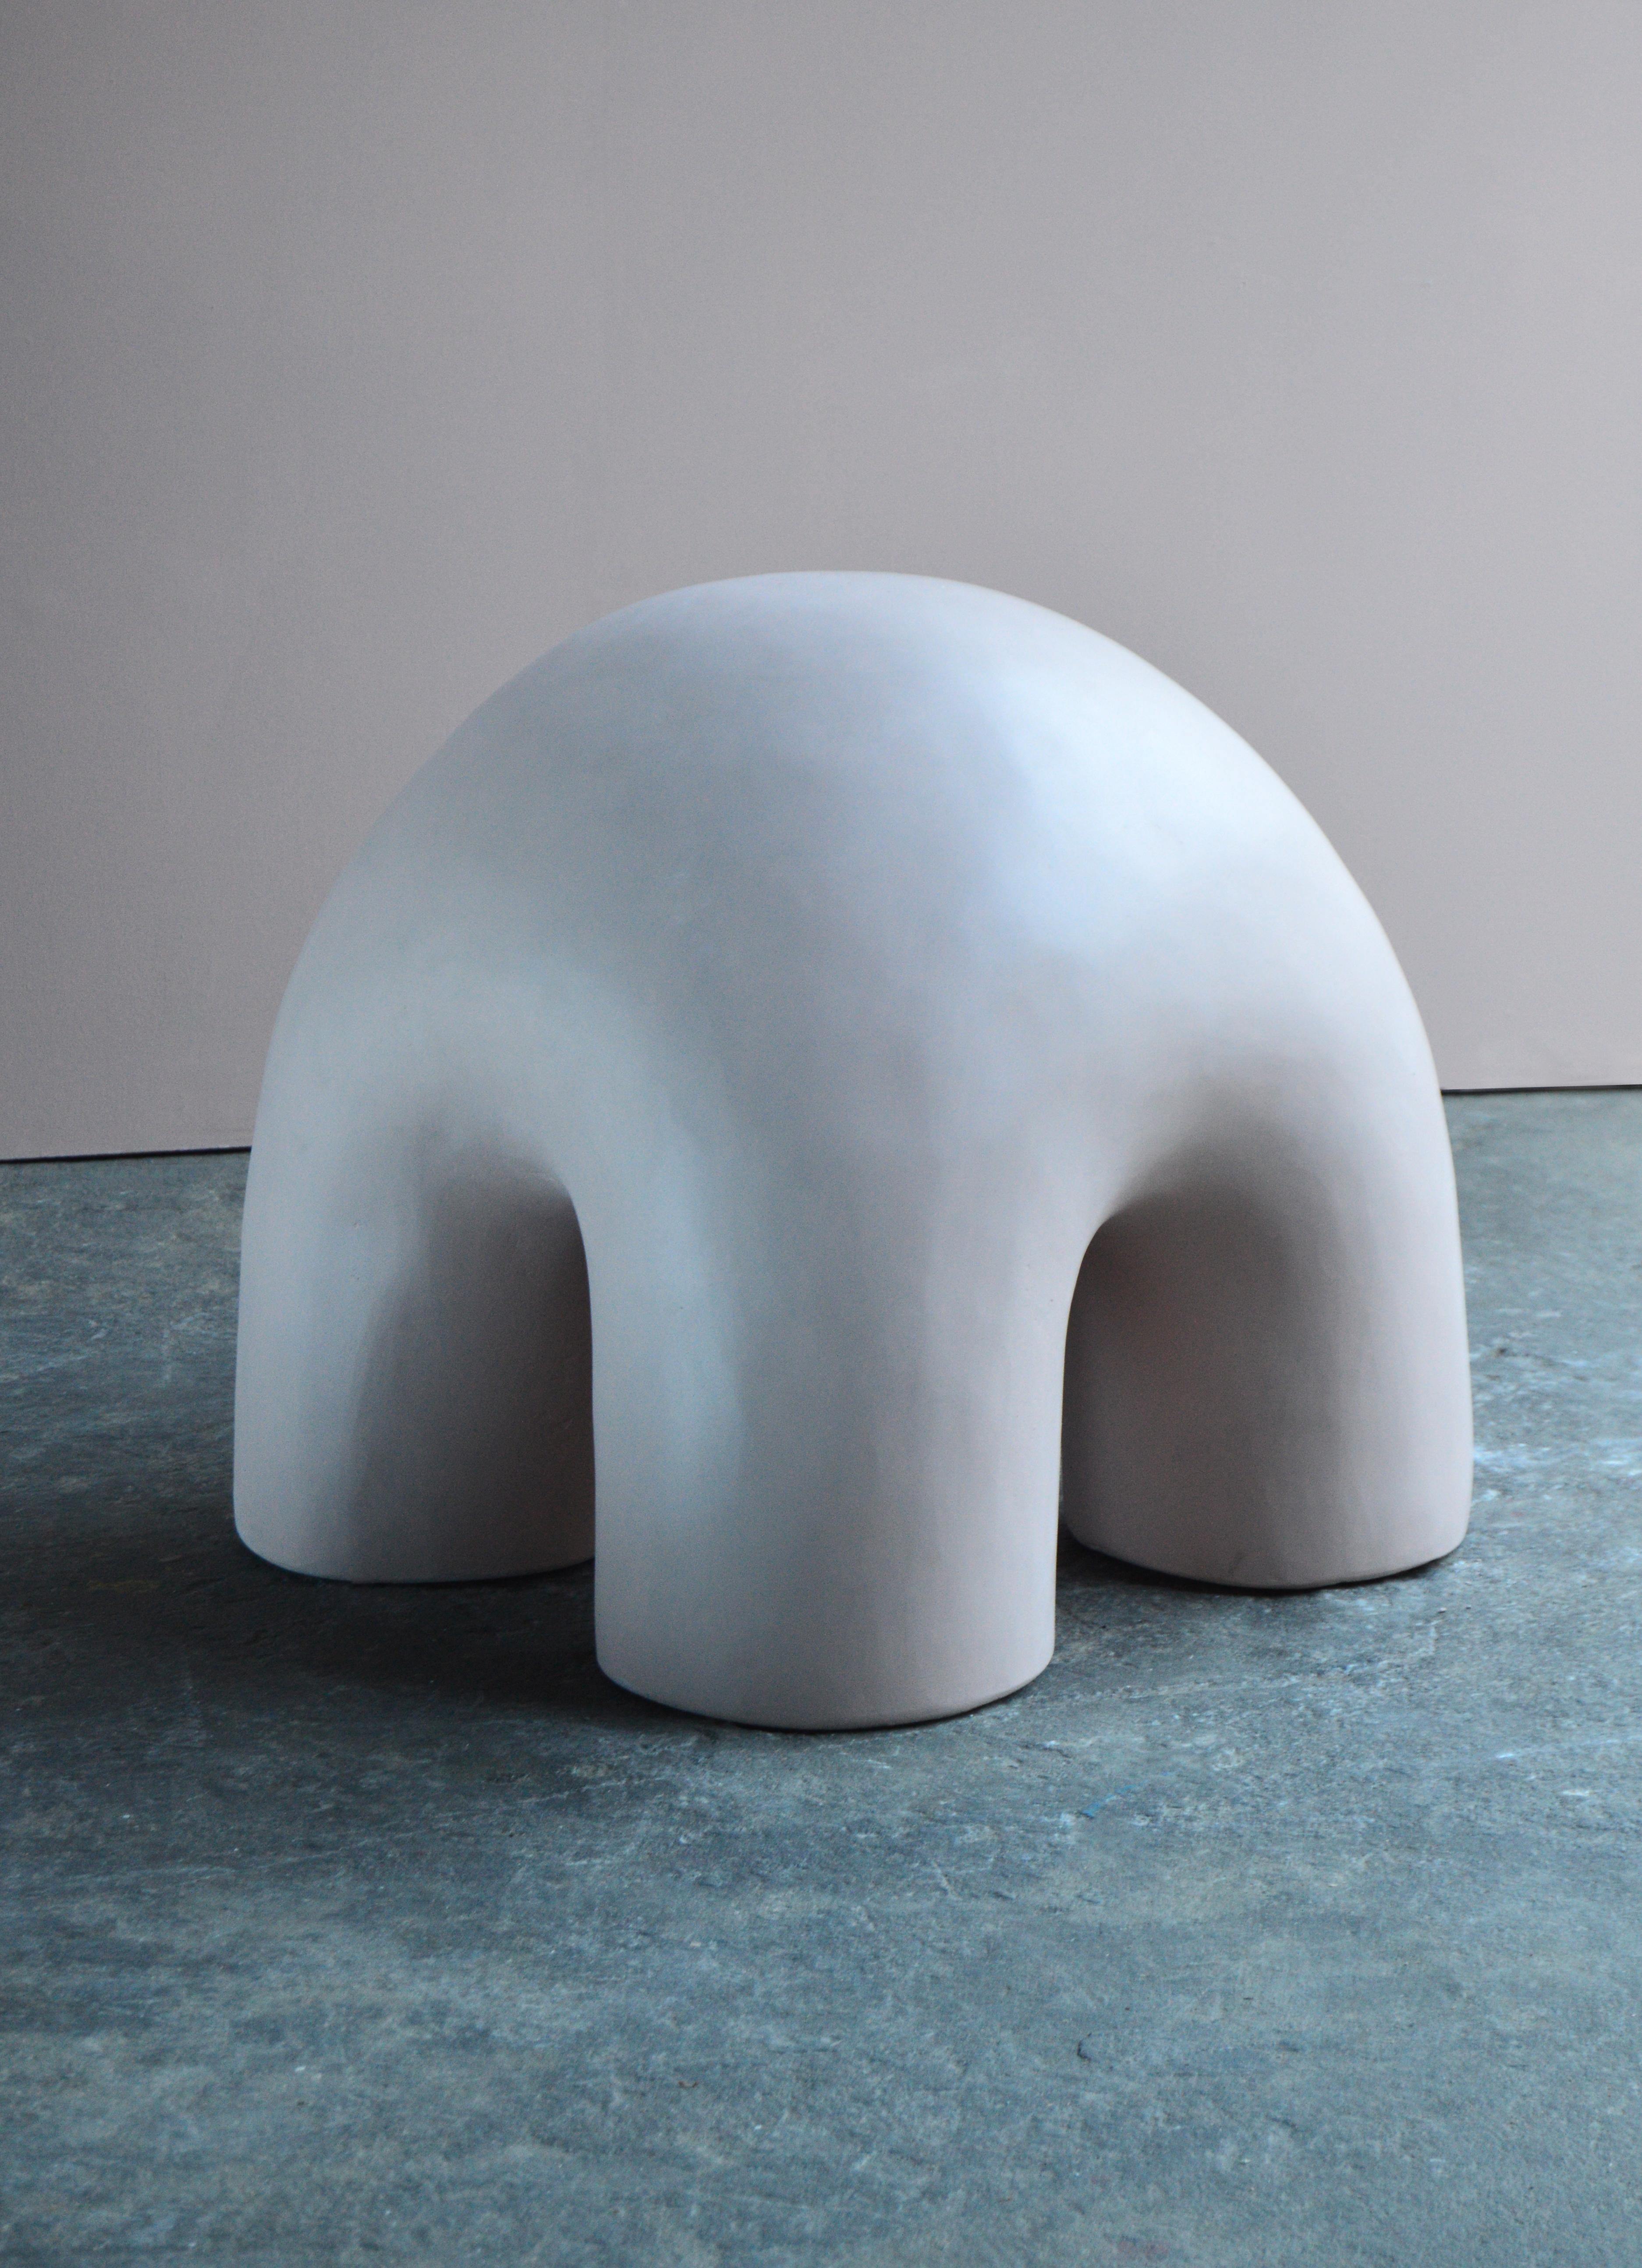 Elephante stool, studio noon
Limited Edition of 50
Signed
Dimensions: 24” H x 24” W x 24” D
Material: pigmented cement

Noon is a Philadelphia based collaboration between designer/architect Nargiz Kazieva and artist Thomas Pontone.

The